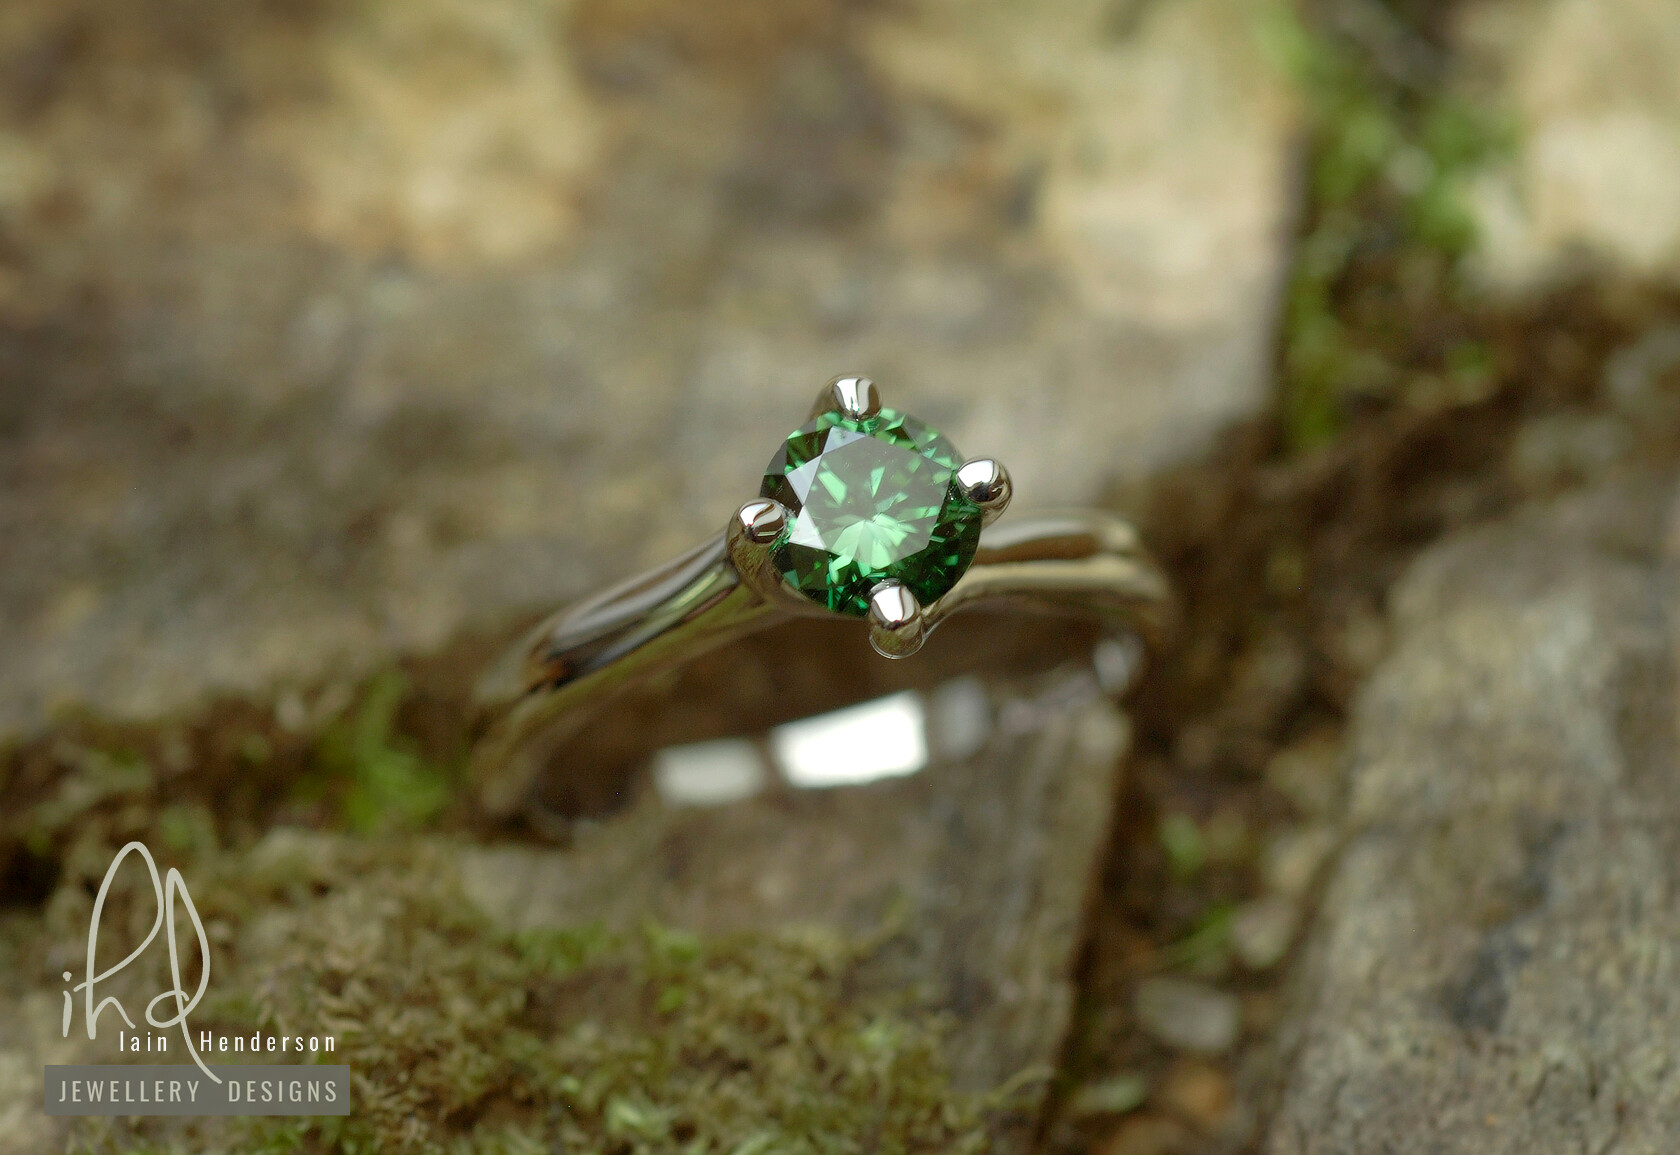 Beautiful green diamond solitaire engagement ring